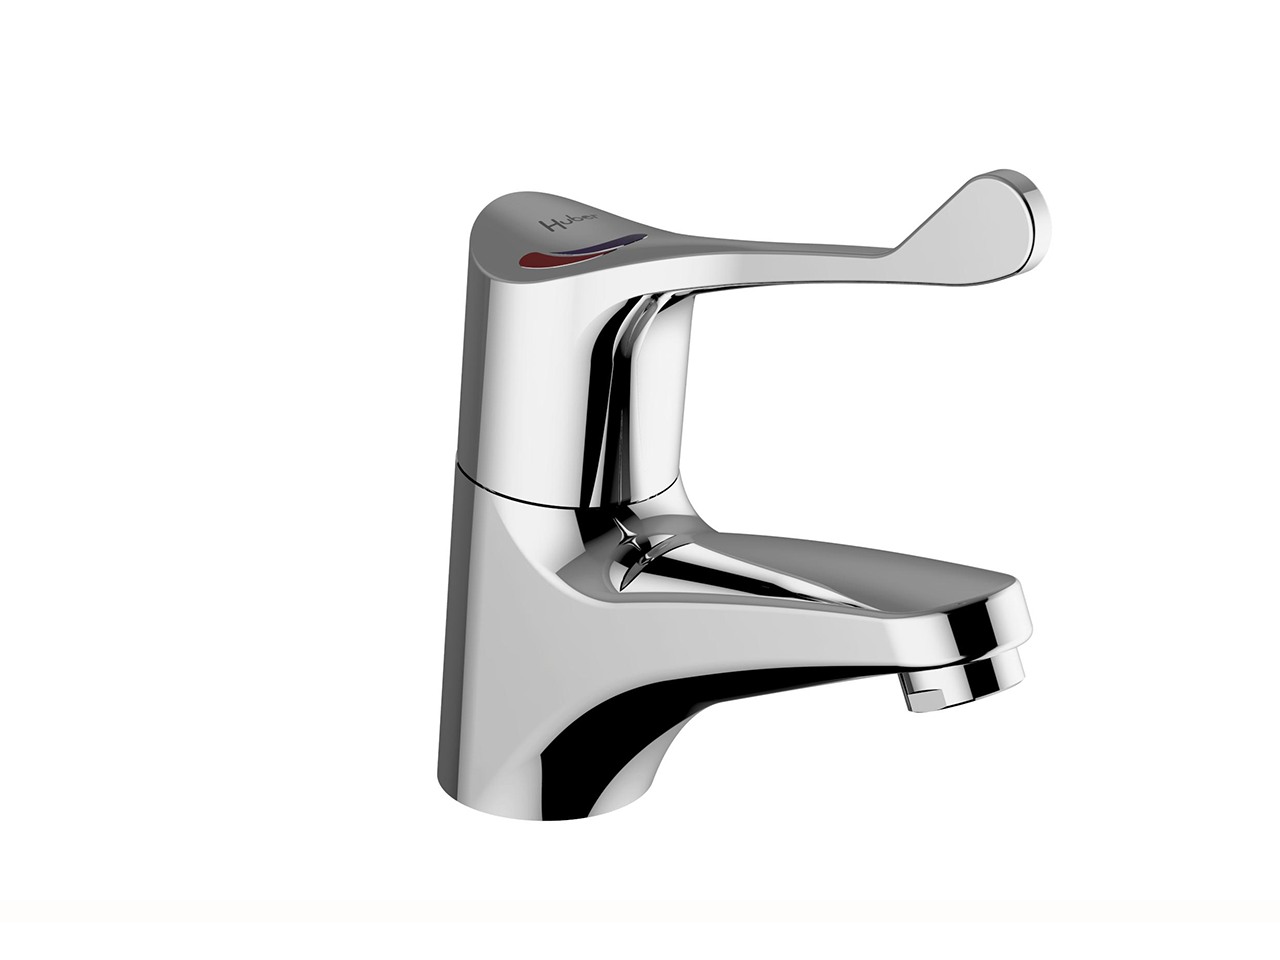 HUBERHTS Basic Thermo Sequential Basin Mixer COMMUNITY